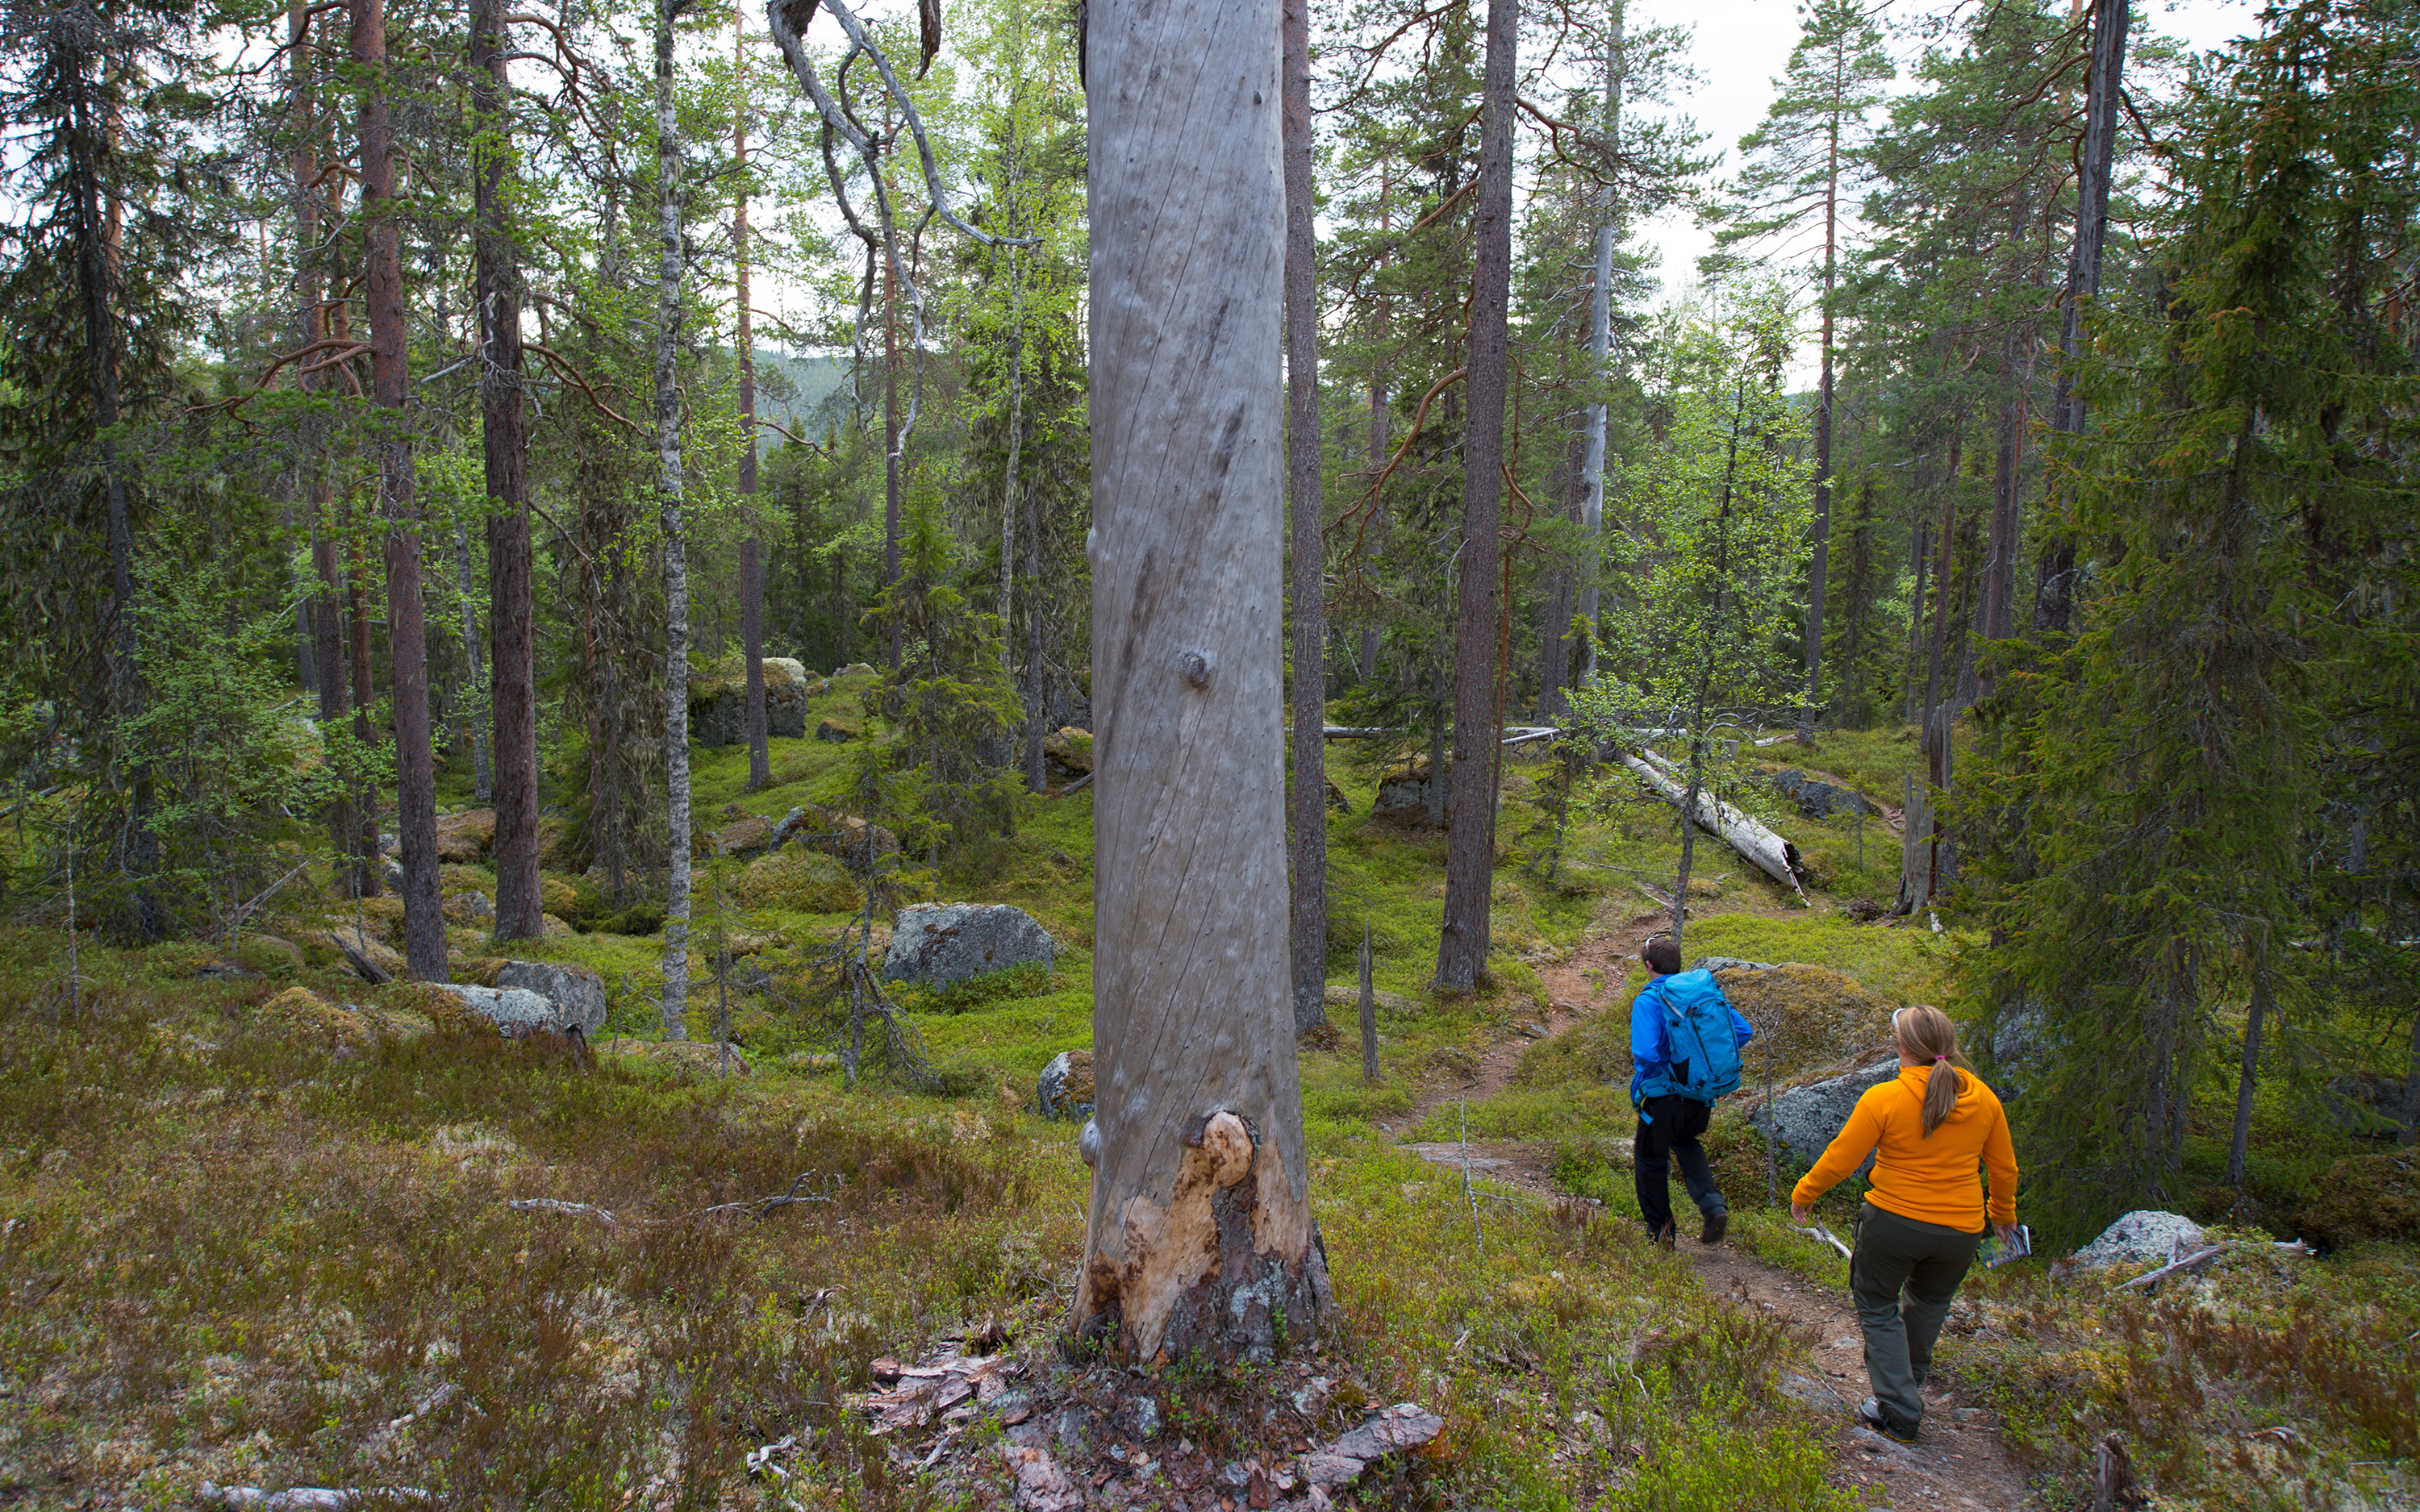 Two people are walking on a path in a forest environment with old pine trees.